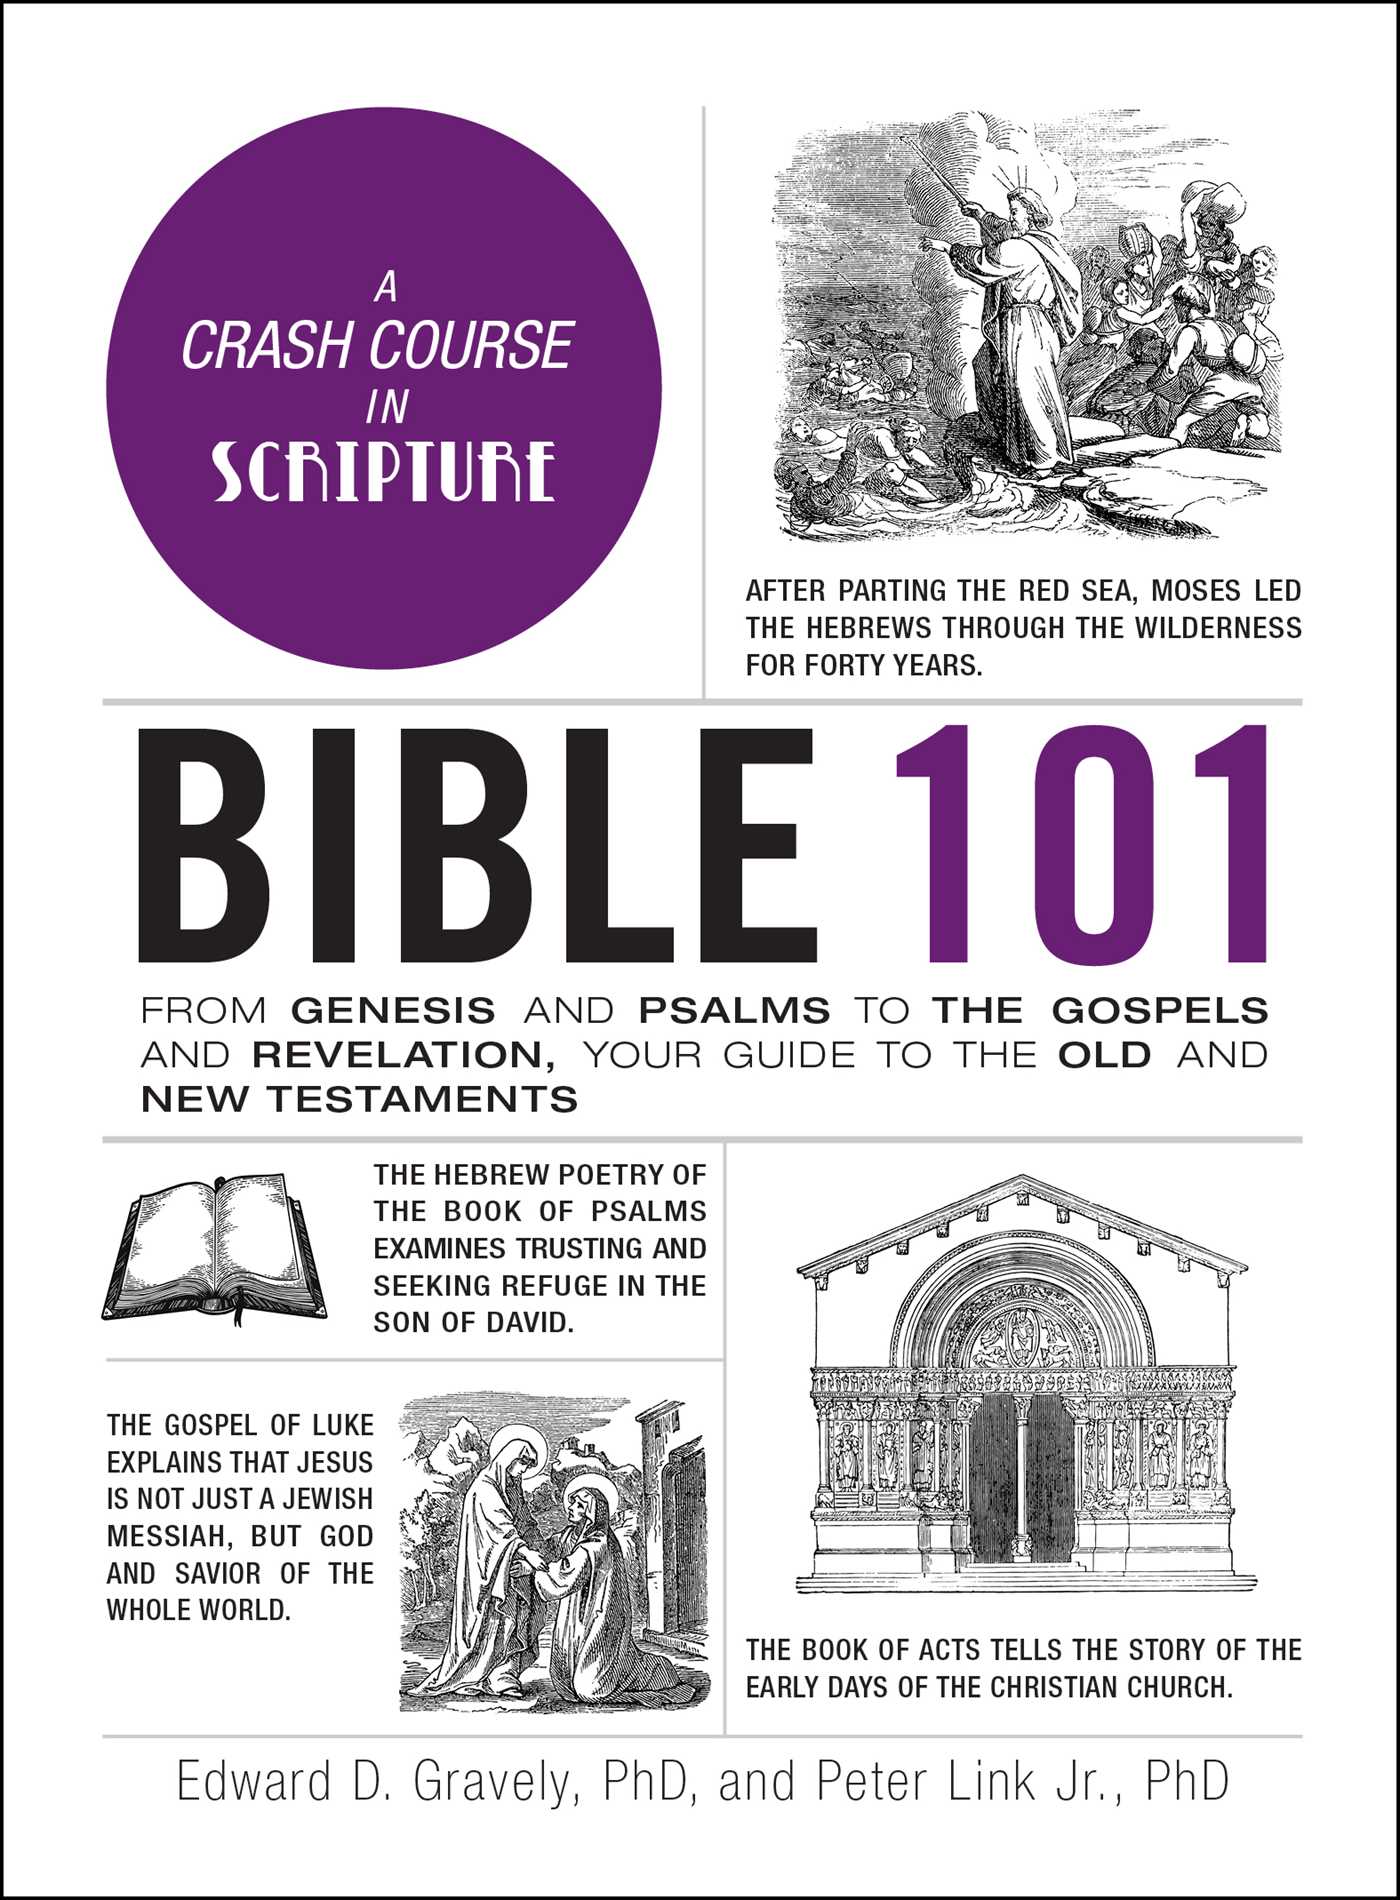 BIBLE 101: FROM GENESIS AND PSALMS TO THE GOSPELS AND REVELATION, YOUR GUIDE TO THE OLD AND NEW (HC)